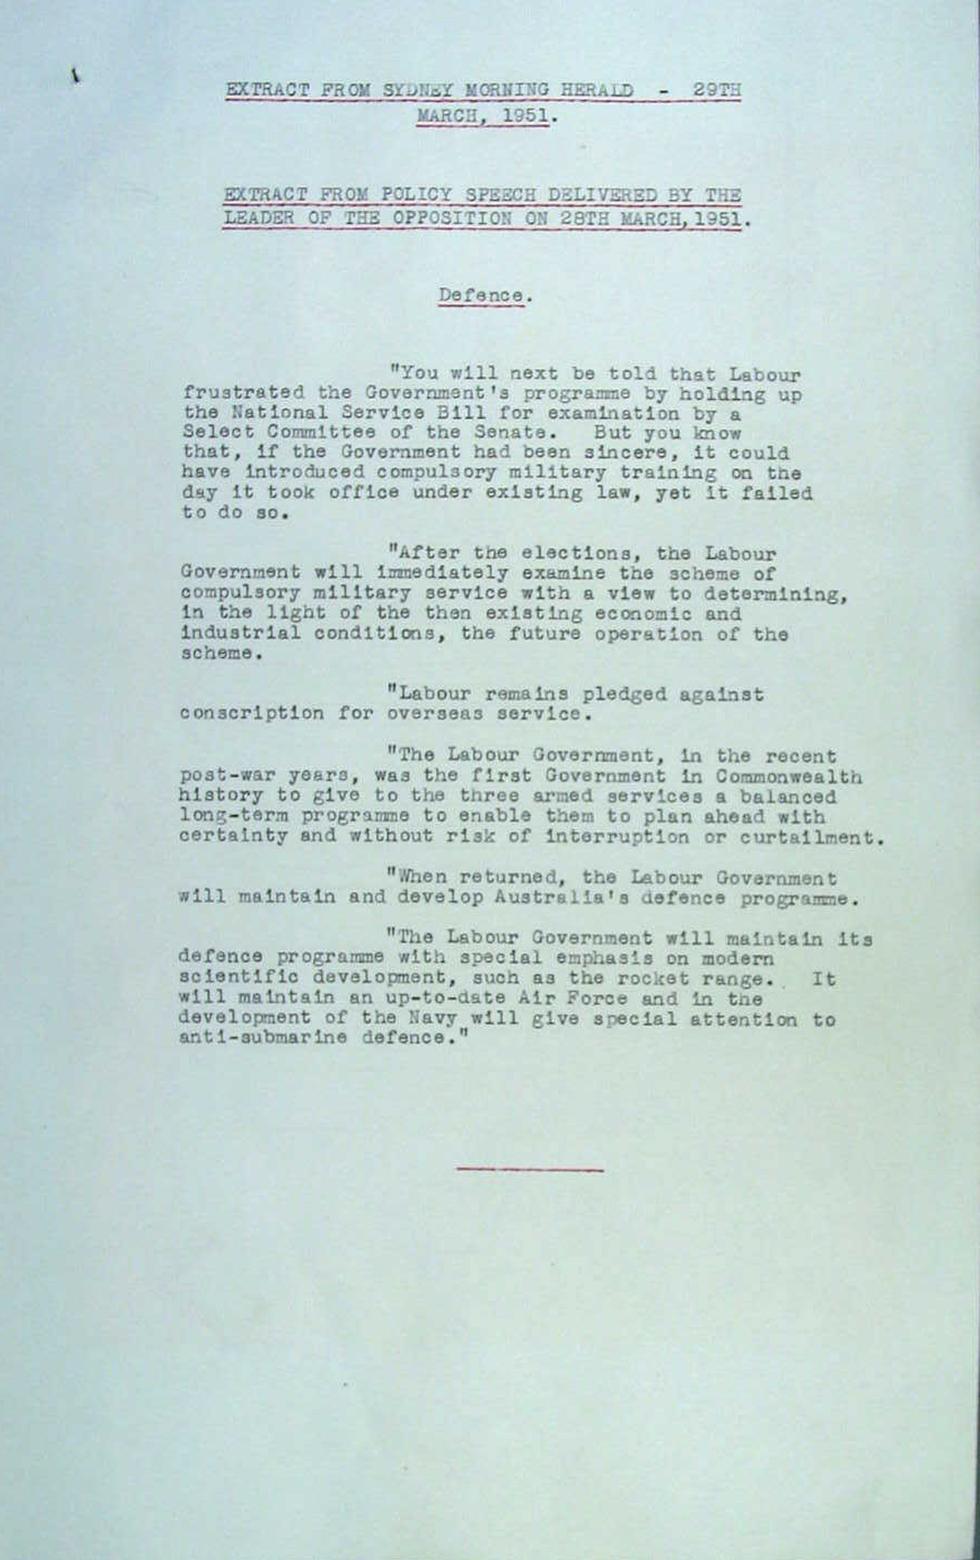 A Defence Department document with published extracts from Ben Chifley’s speech on 28 March 1951.